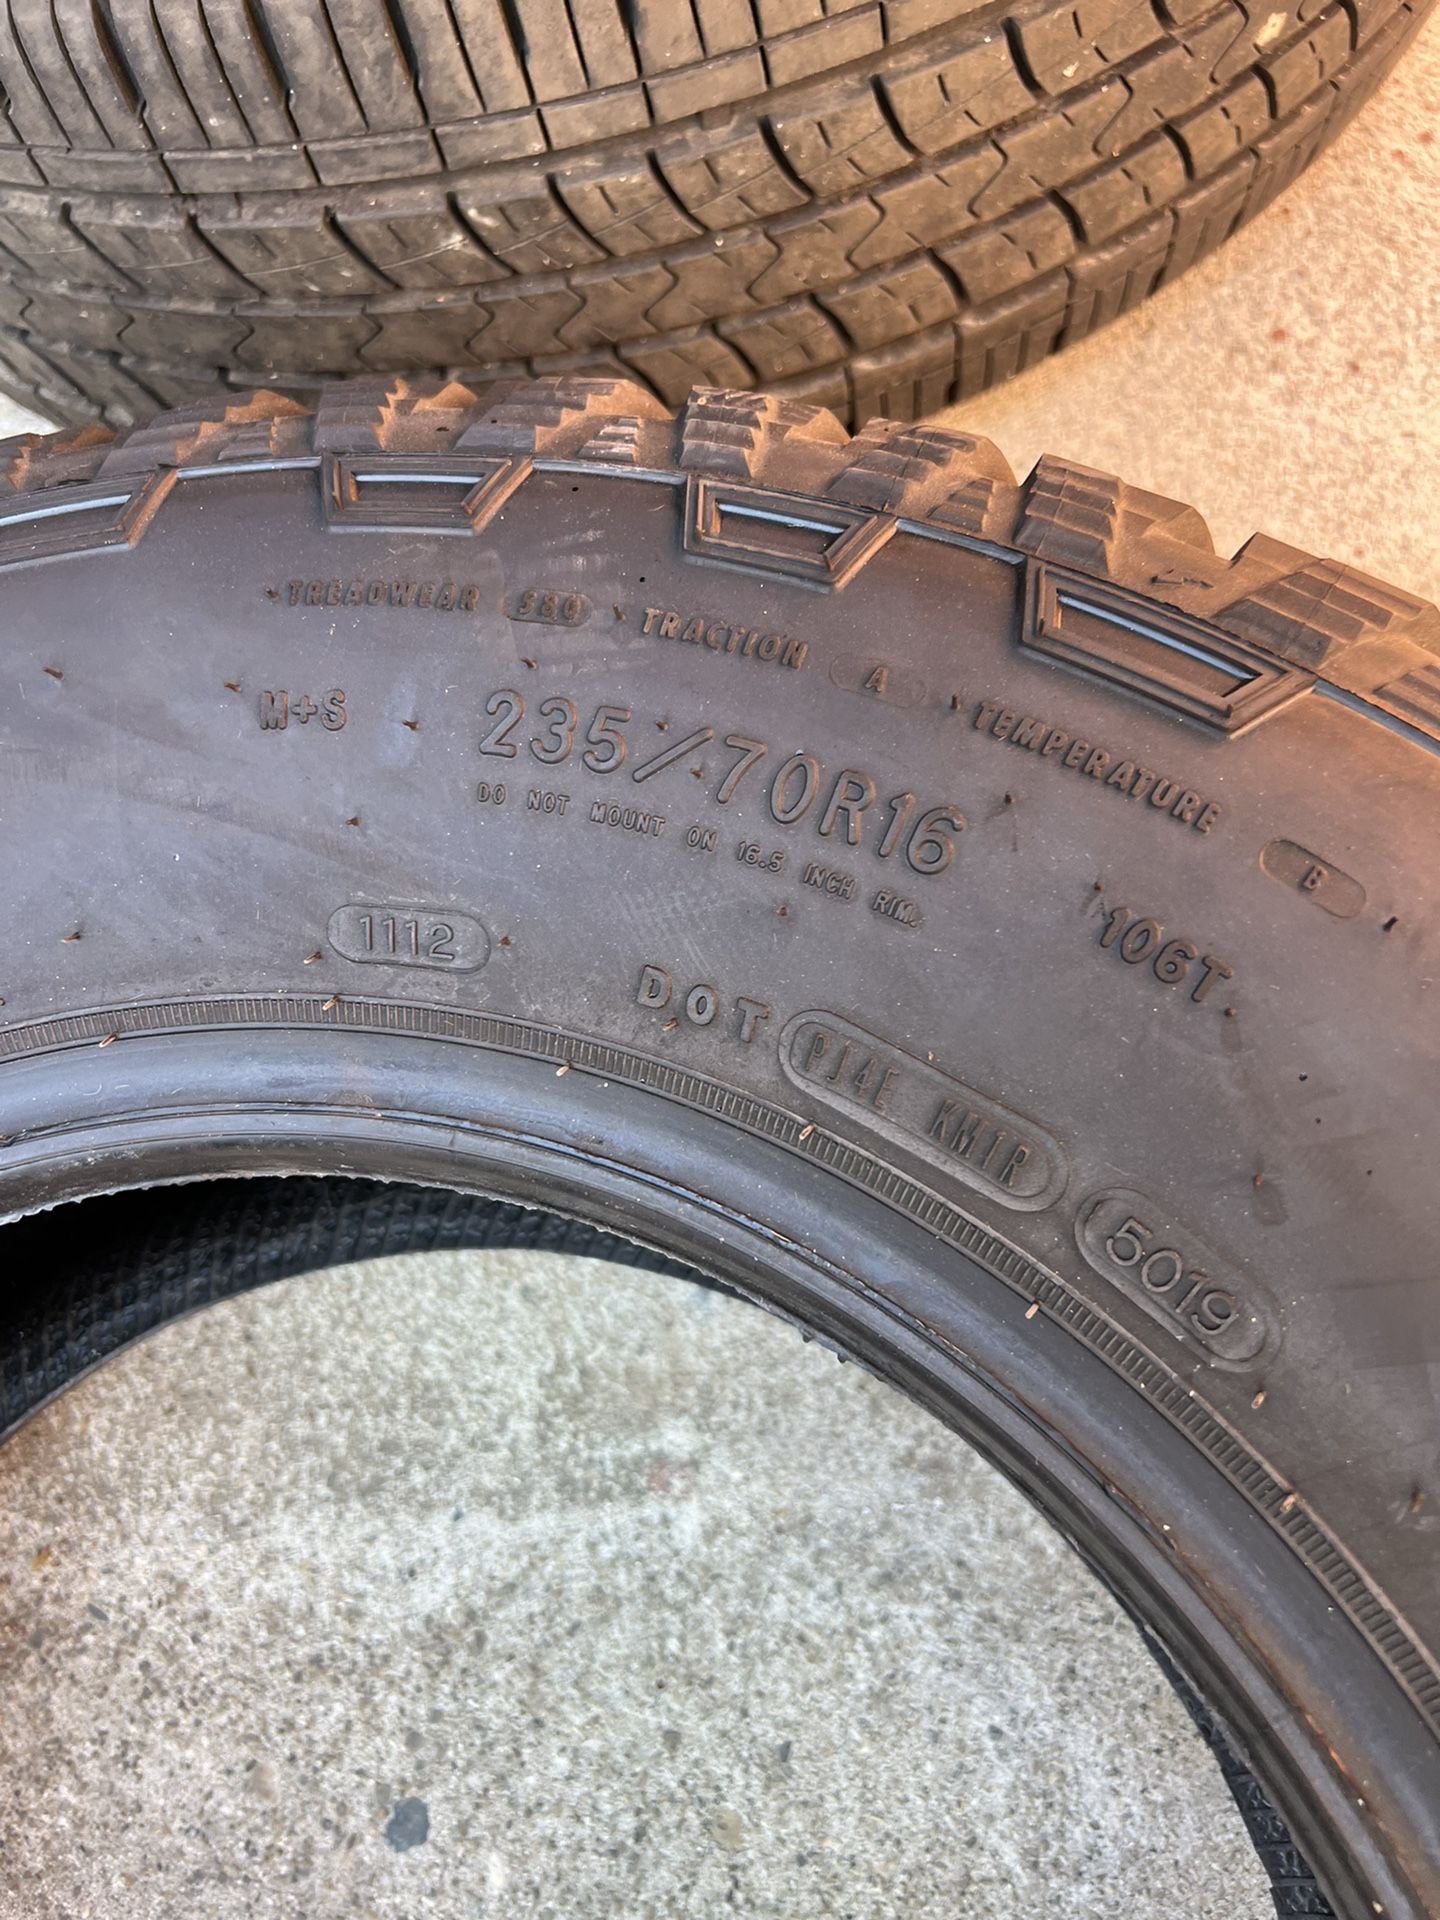 Goodyear Wrangler Trailrunner AT 235/70R16 New for Sale in Los Angeles, CA  - OfferUp